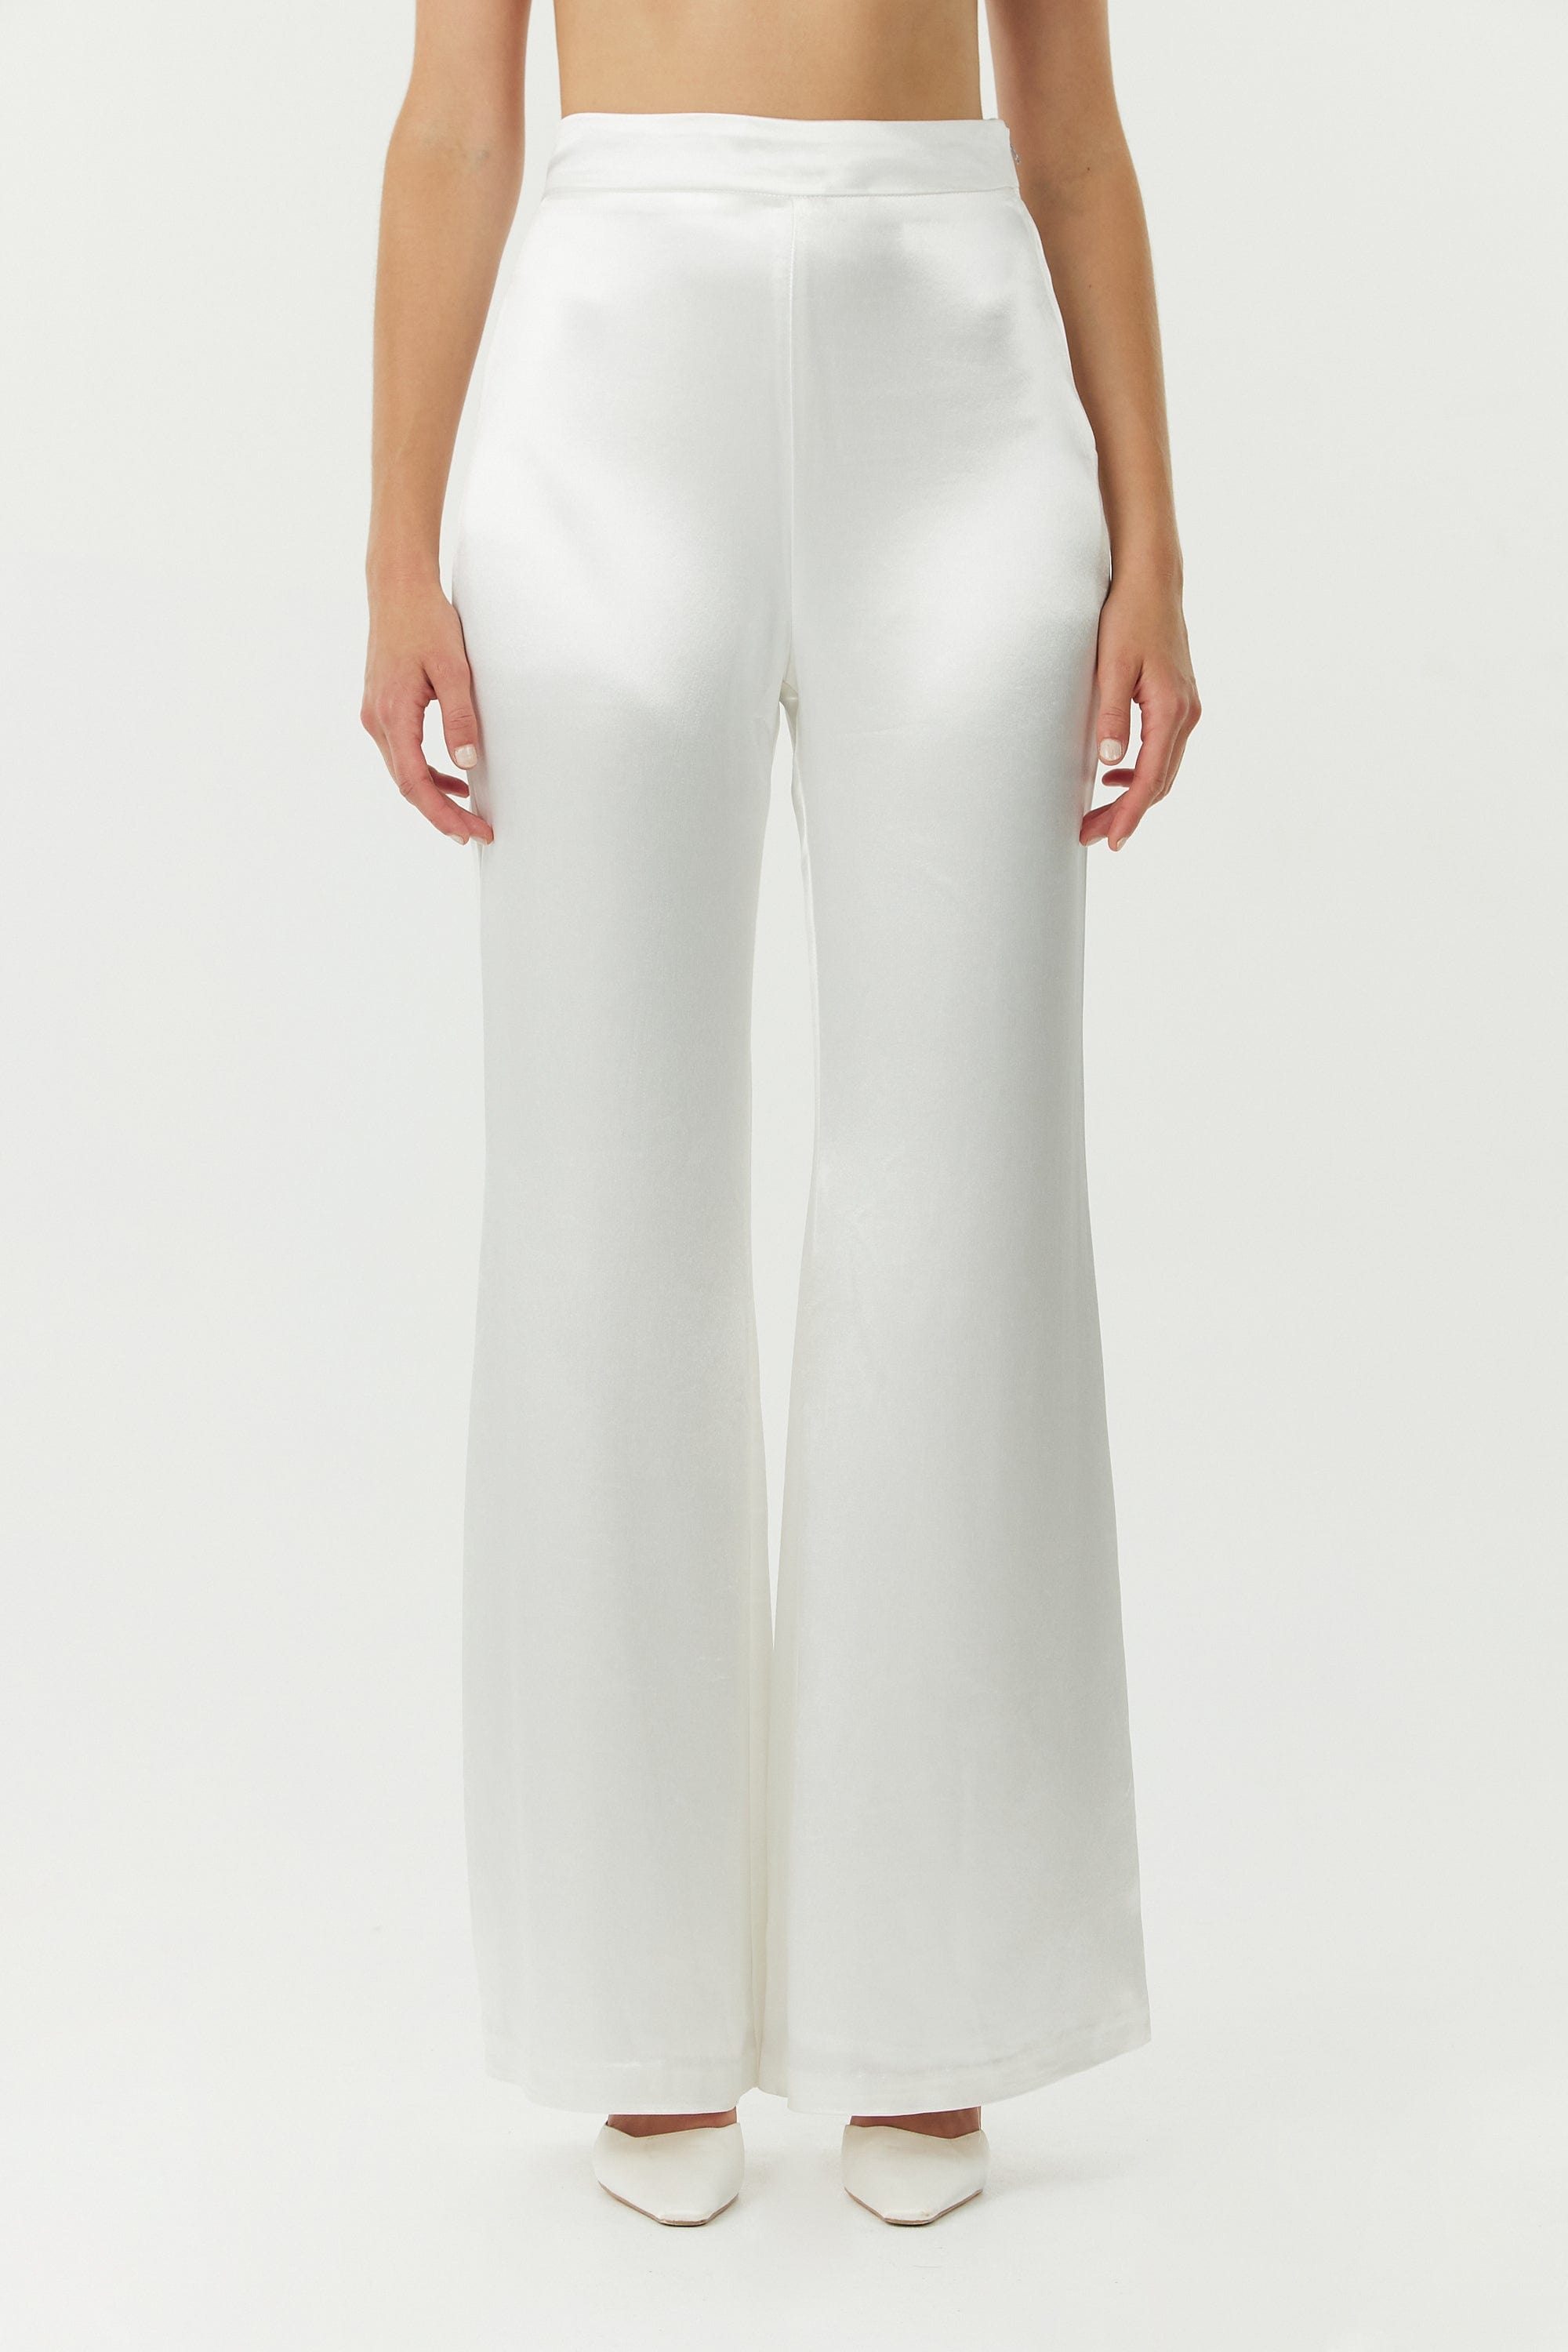 4G jacquard flared pants in white - Givenchy